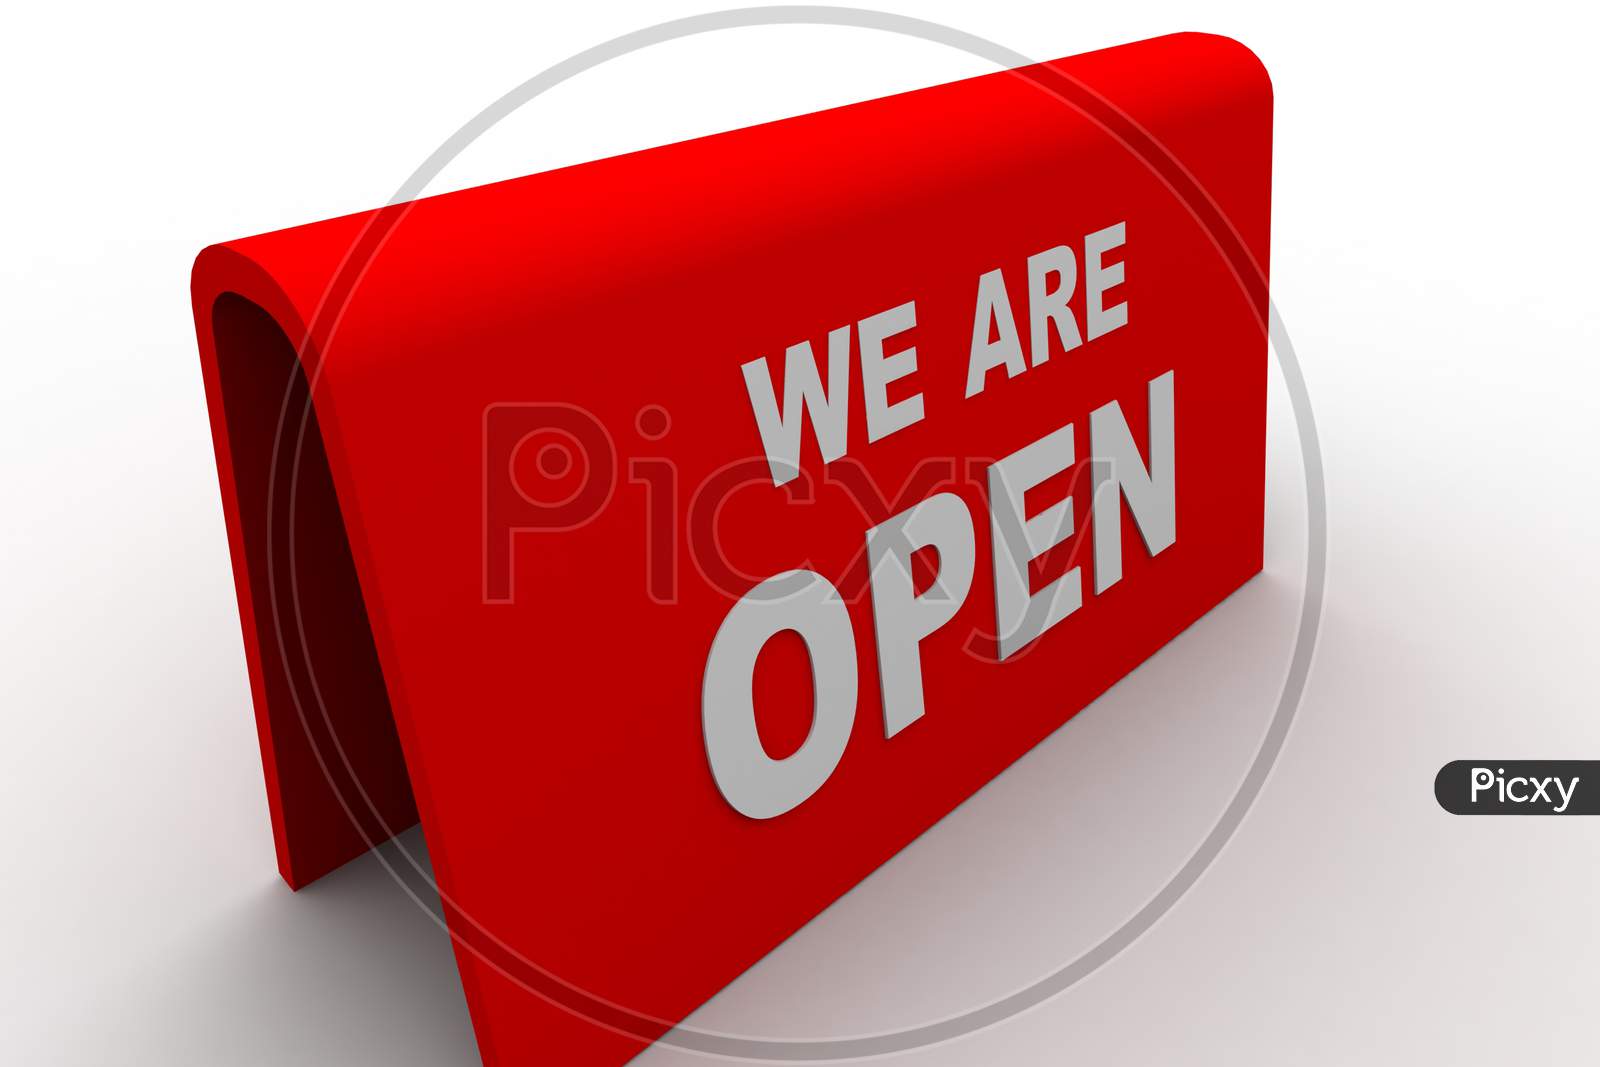 We Are Open Board Isolated with White Background